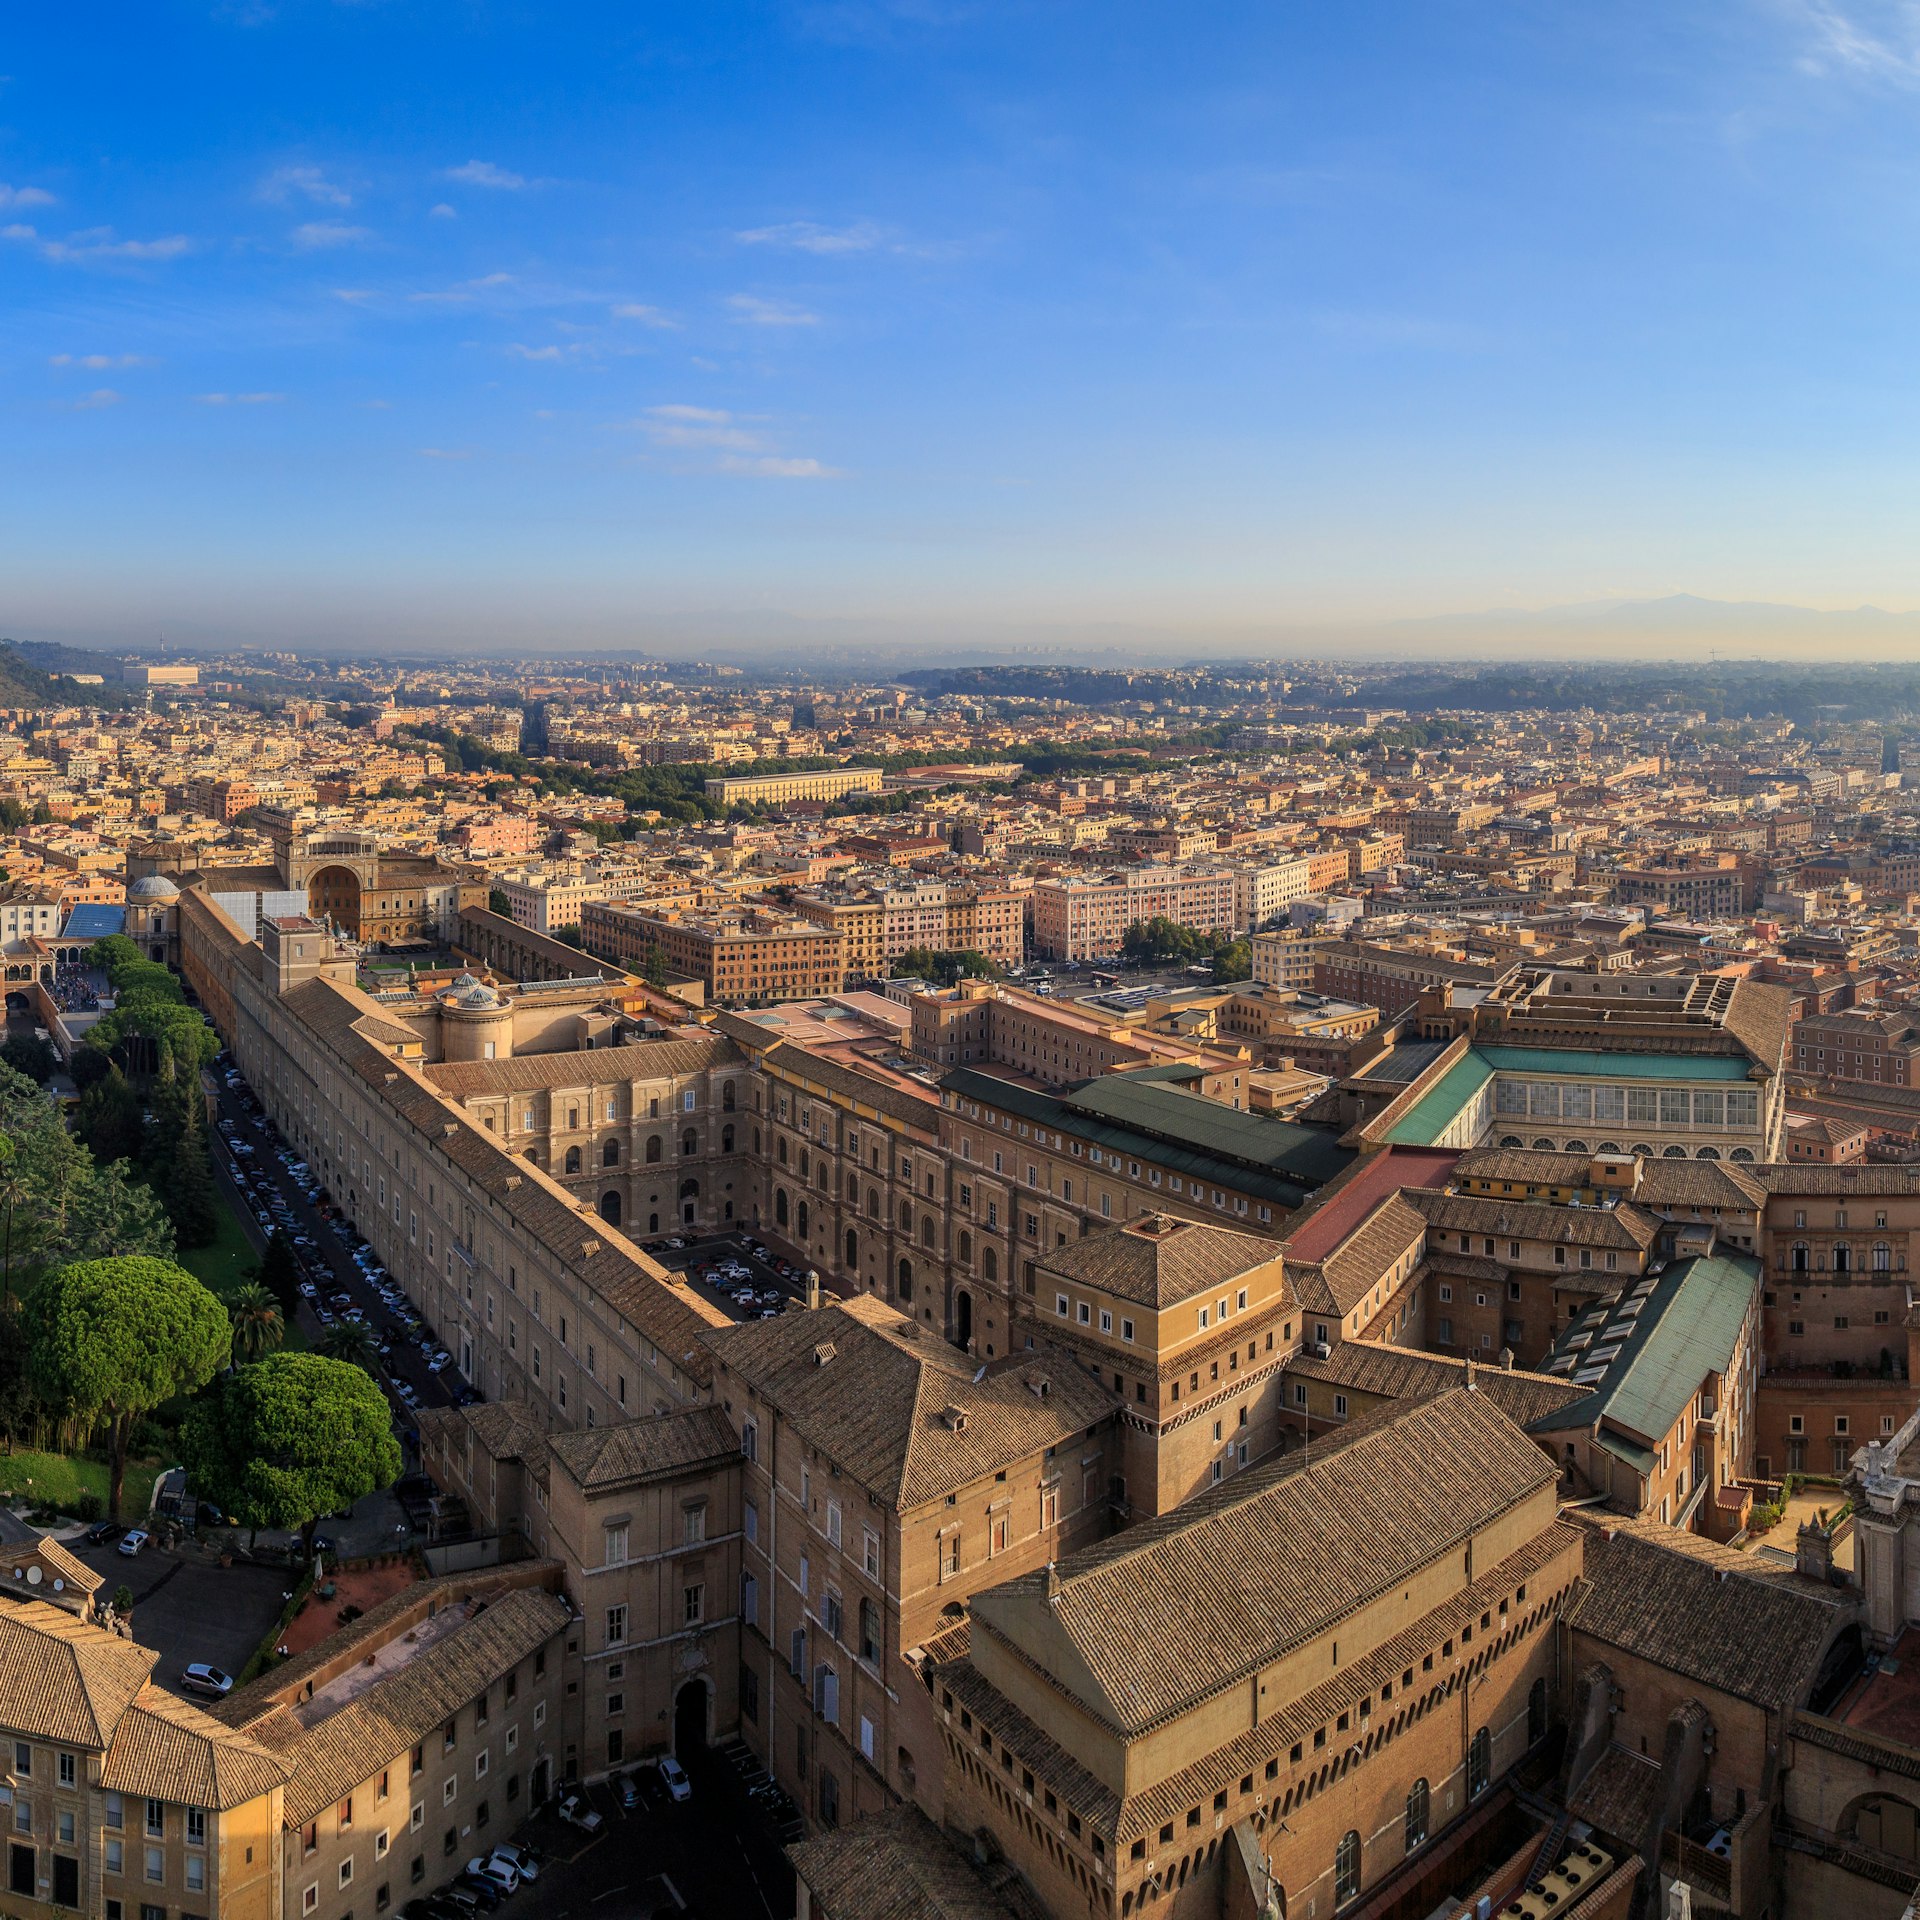 An aerial view of the Sistine Chapel and the Vatican in Rome